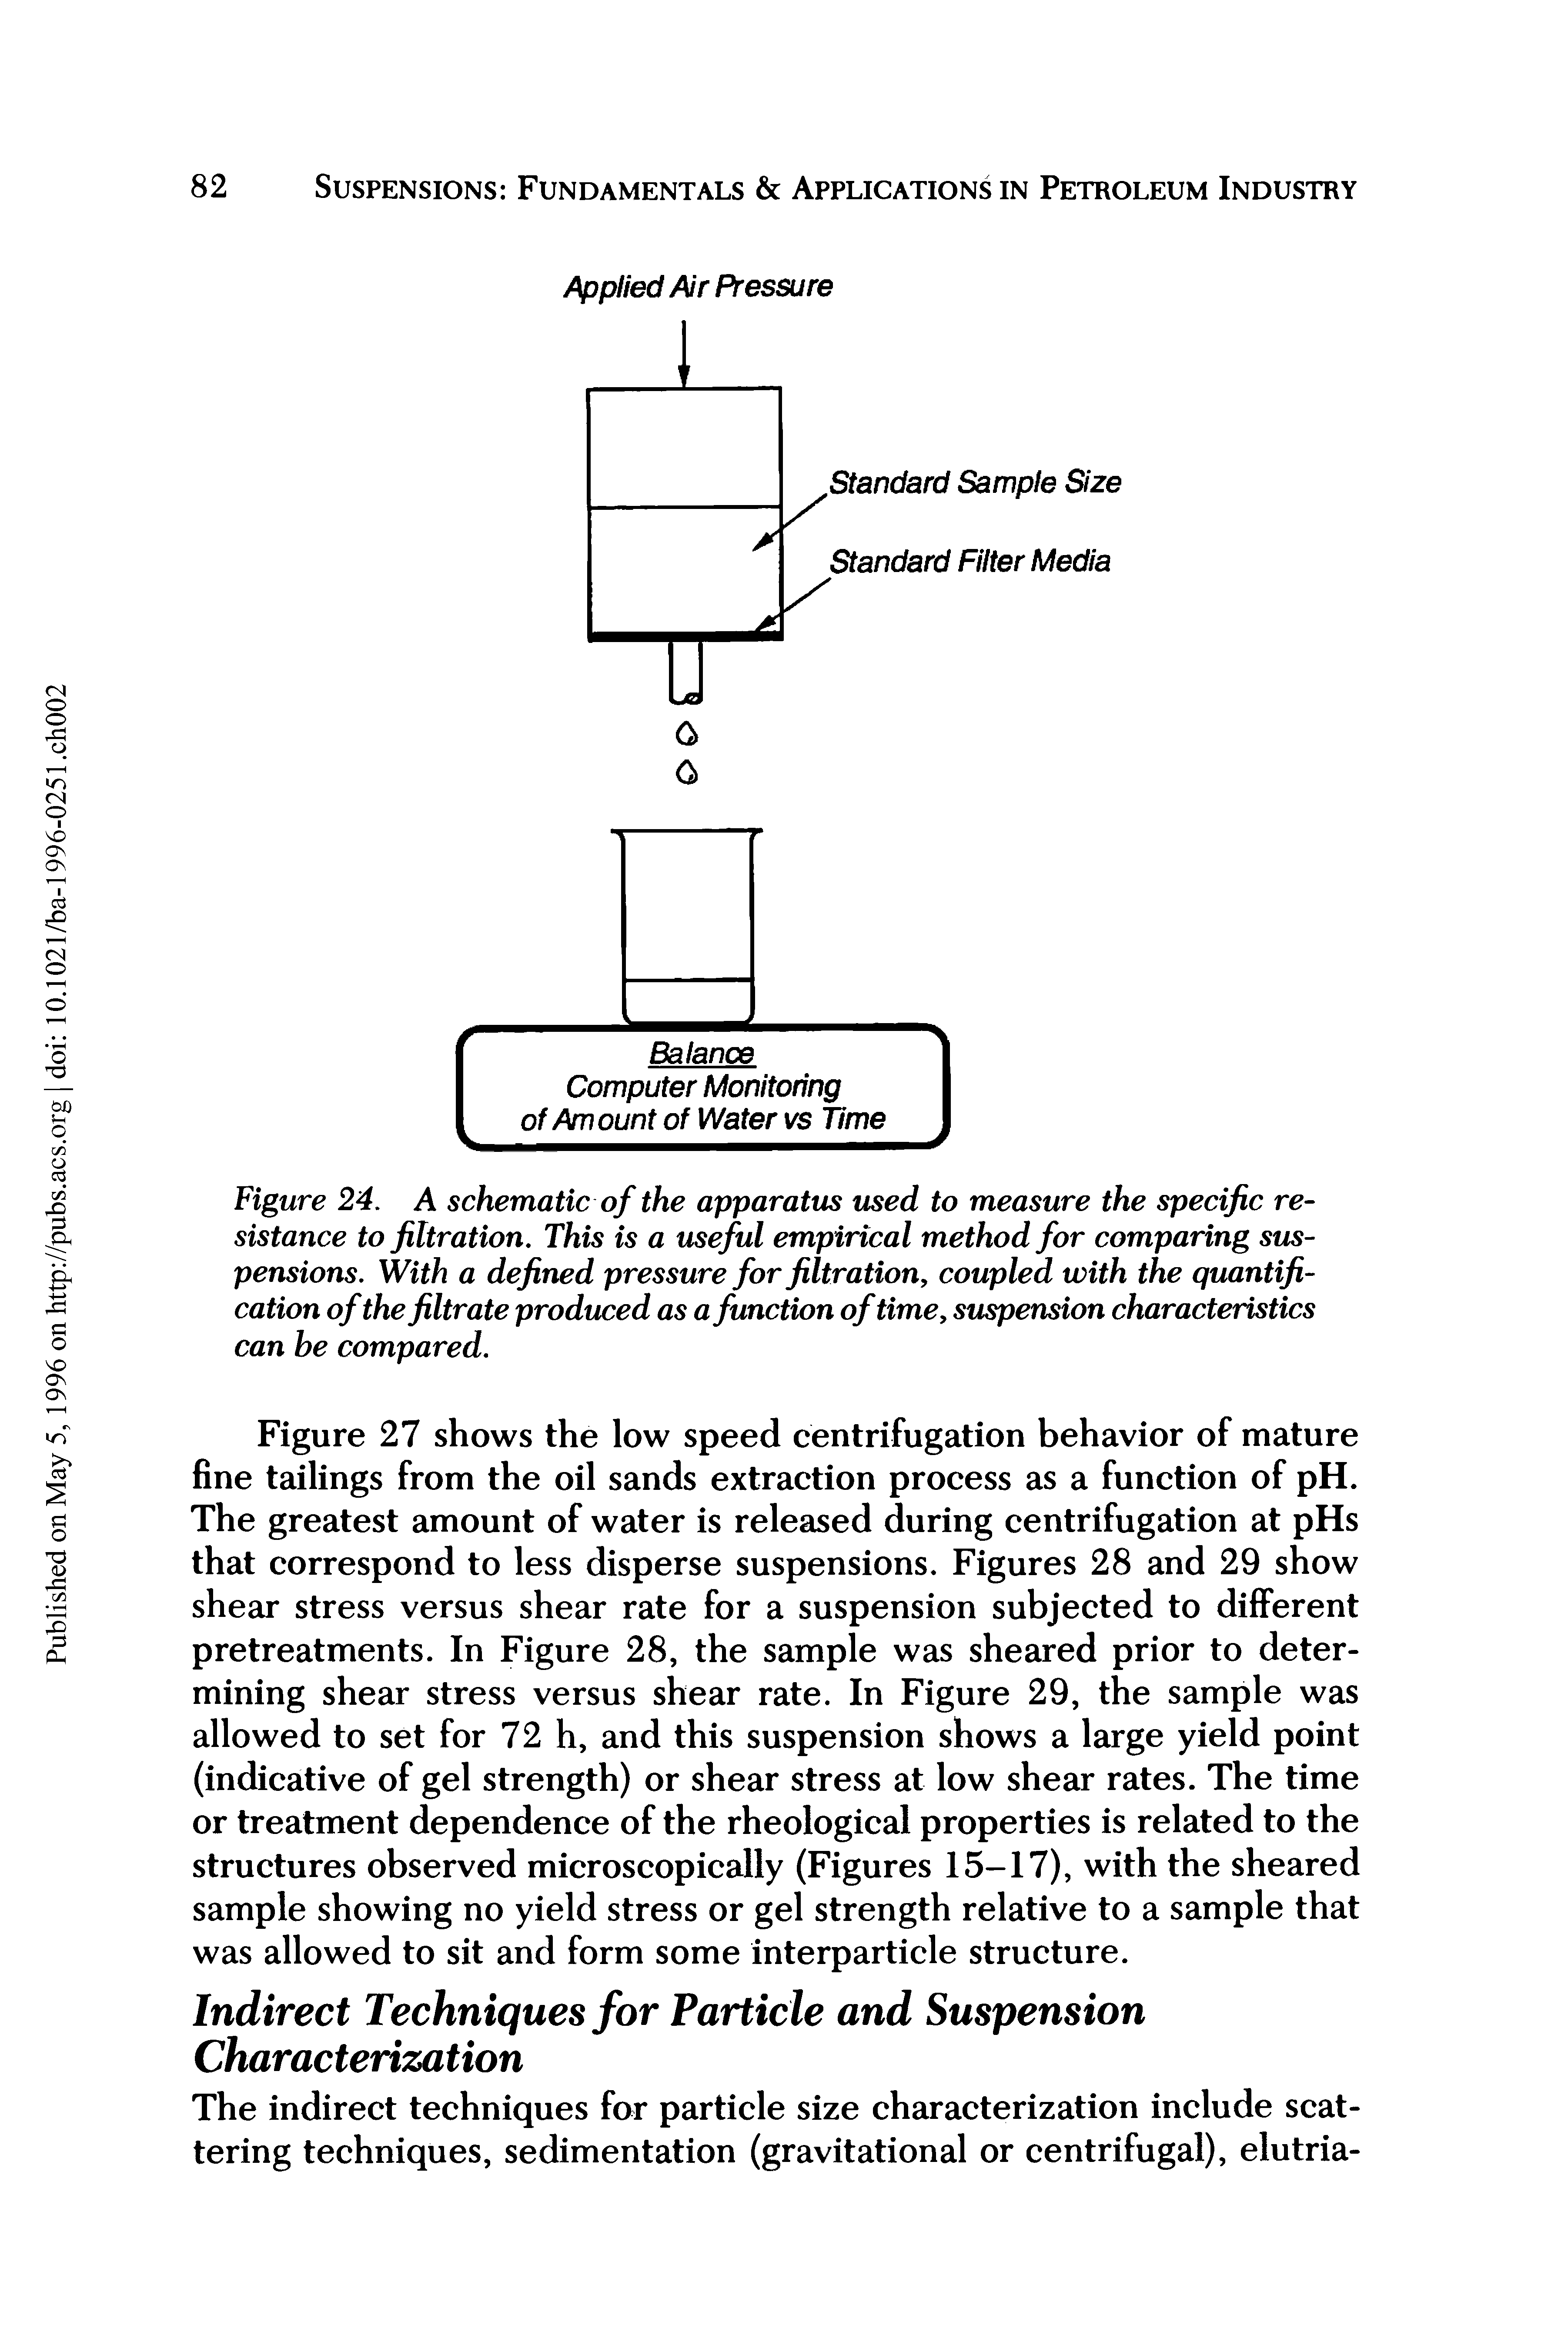 Figure 24. A schematic of the apparatus used to measure the specific resistance to filtration. This is a useful empirical method for comparing suspensions. With a defined pressure for filtration, coupled with the quantification of the filtrate produced as a function of time, suspension characteristics can he compared.